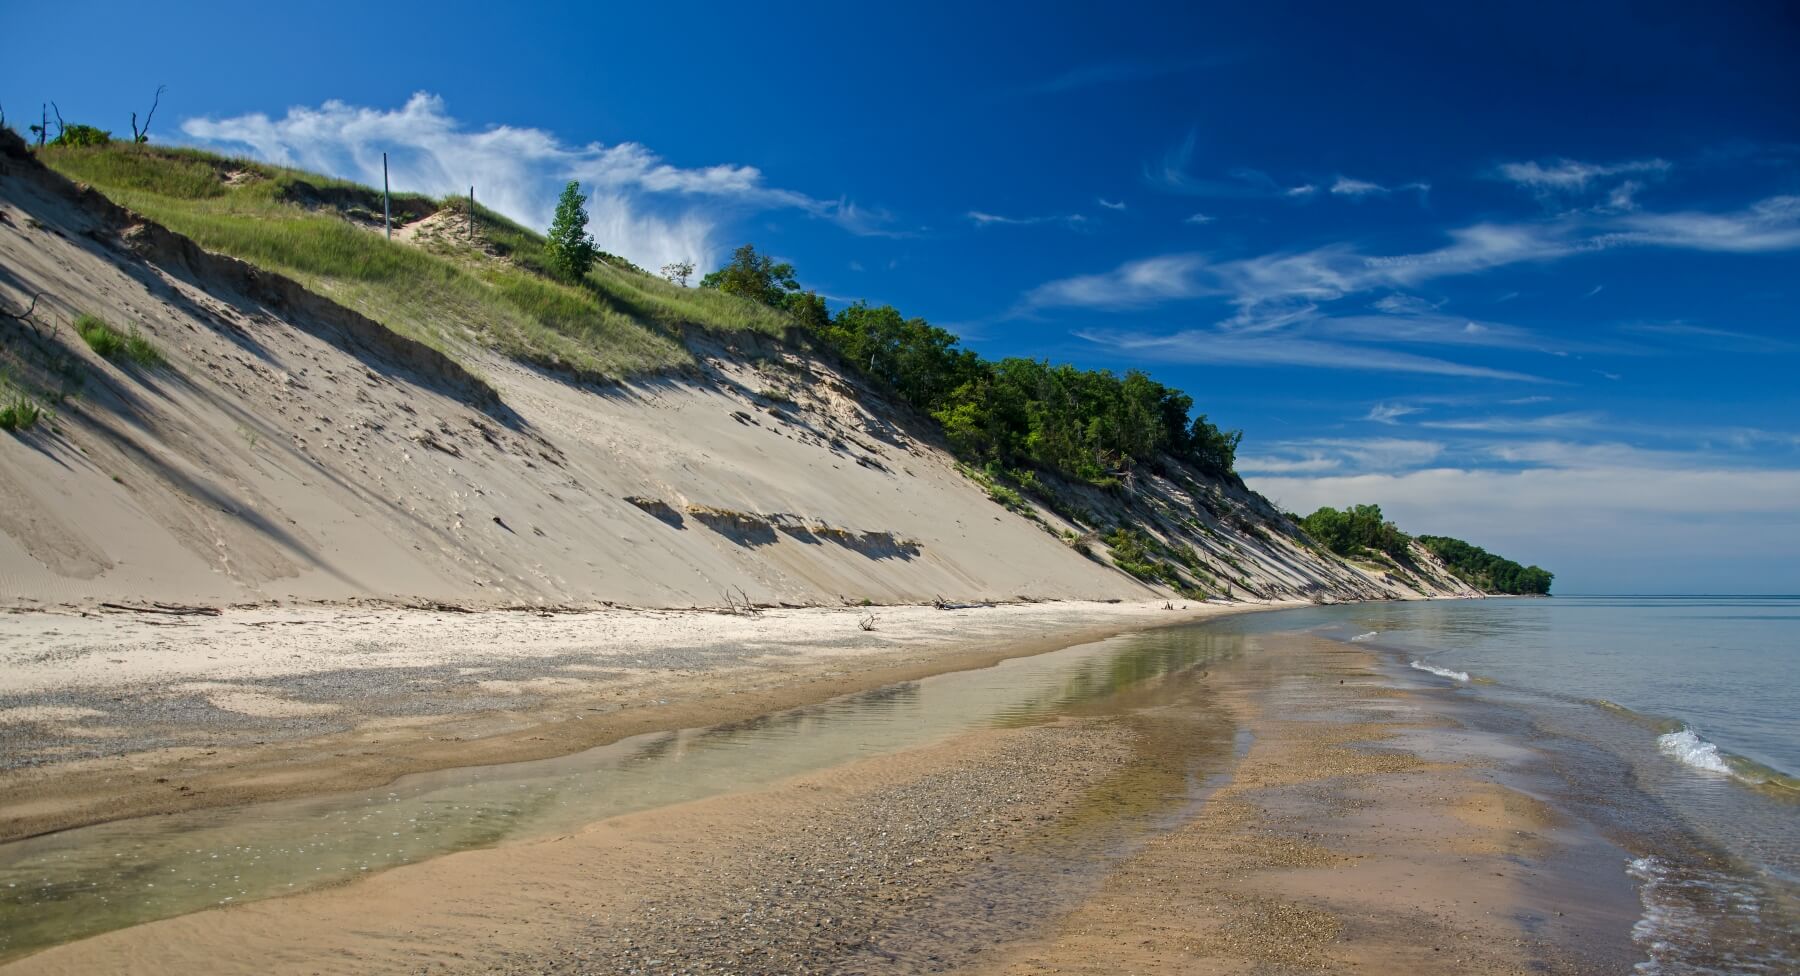 Sand dunes along Lake Michigan with a hilly dune rising to the left and covered in sand and green vegetation, running into the brown shallow water of the lake on the right.